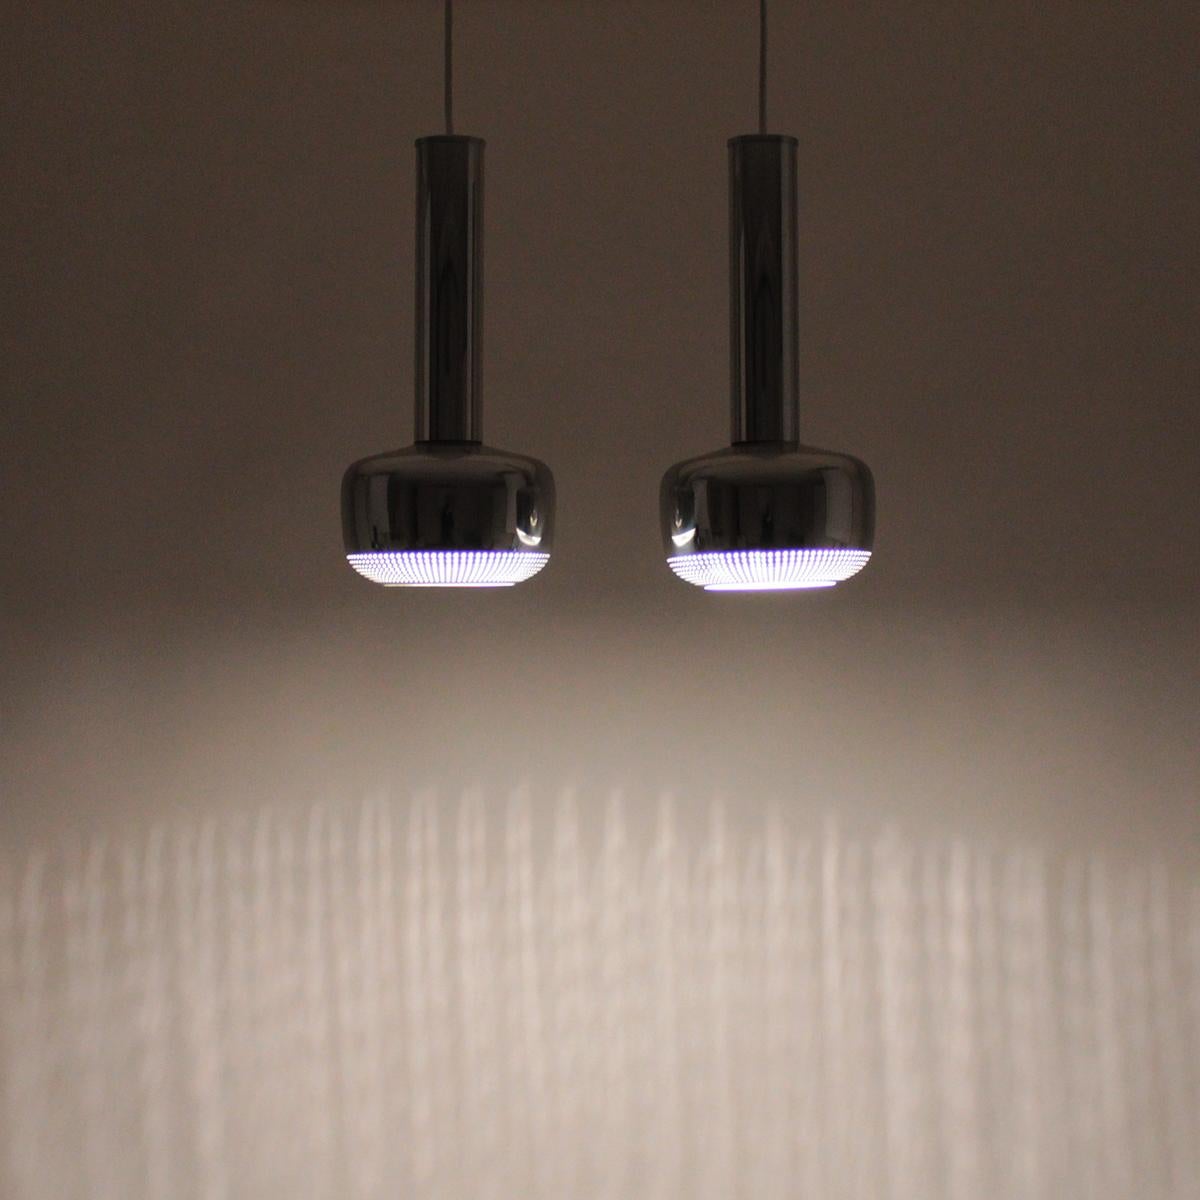 Guldpendel, Chrome ceiling lights by Danish architect Vilhelm Lauritzen in 1958 and produced by Louis Poulsen - Scandinavian Modern pendant pair in rare excellent vintage condition including their original boxes!

This minimalist pair of chromed